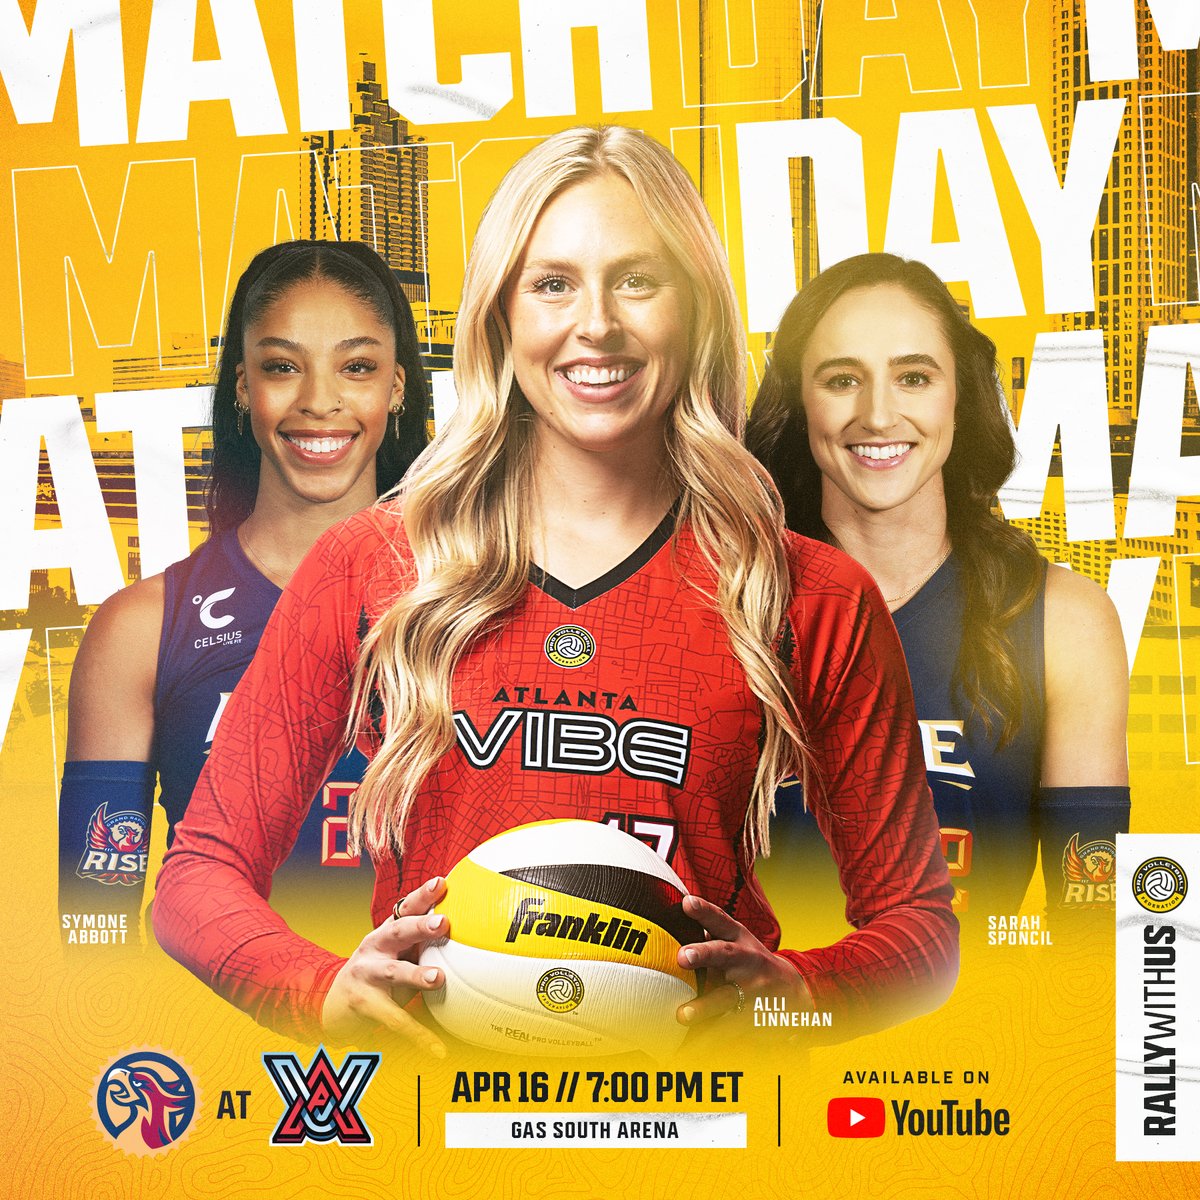 MATCH DAY! The @AtlantaVibeVB host the @GR_Rise tonight at 7:00 p.m. ET. 📺 @YouTube #RealProVolleyball #ProVolleyball